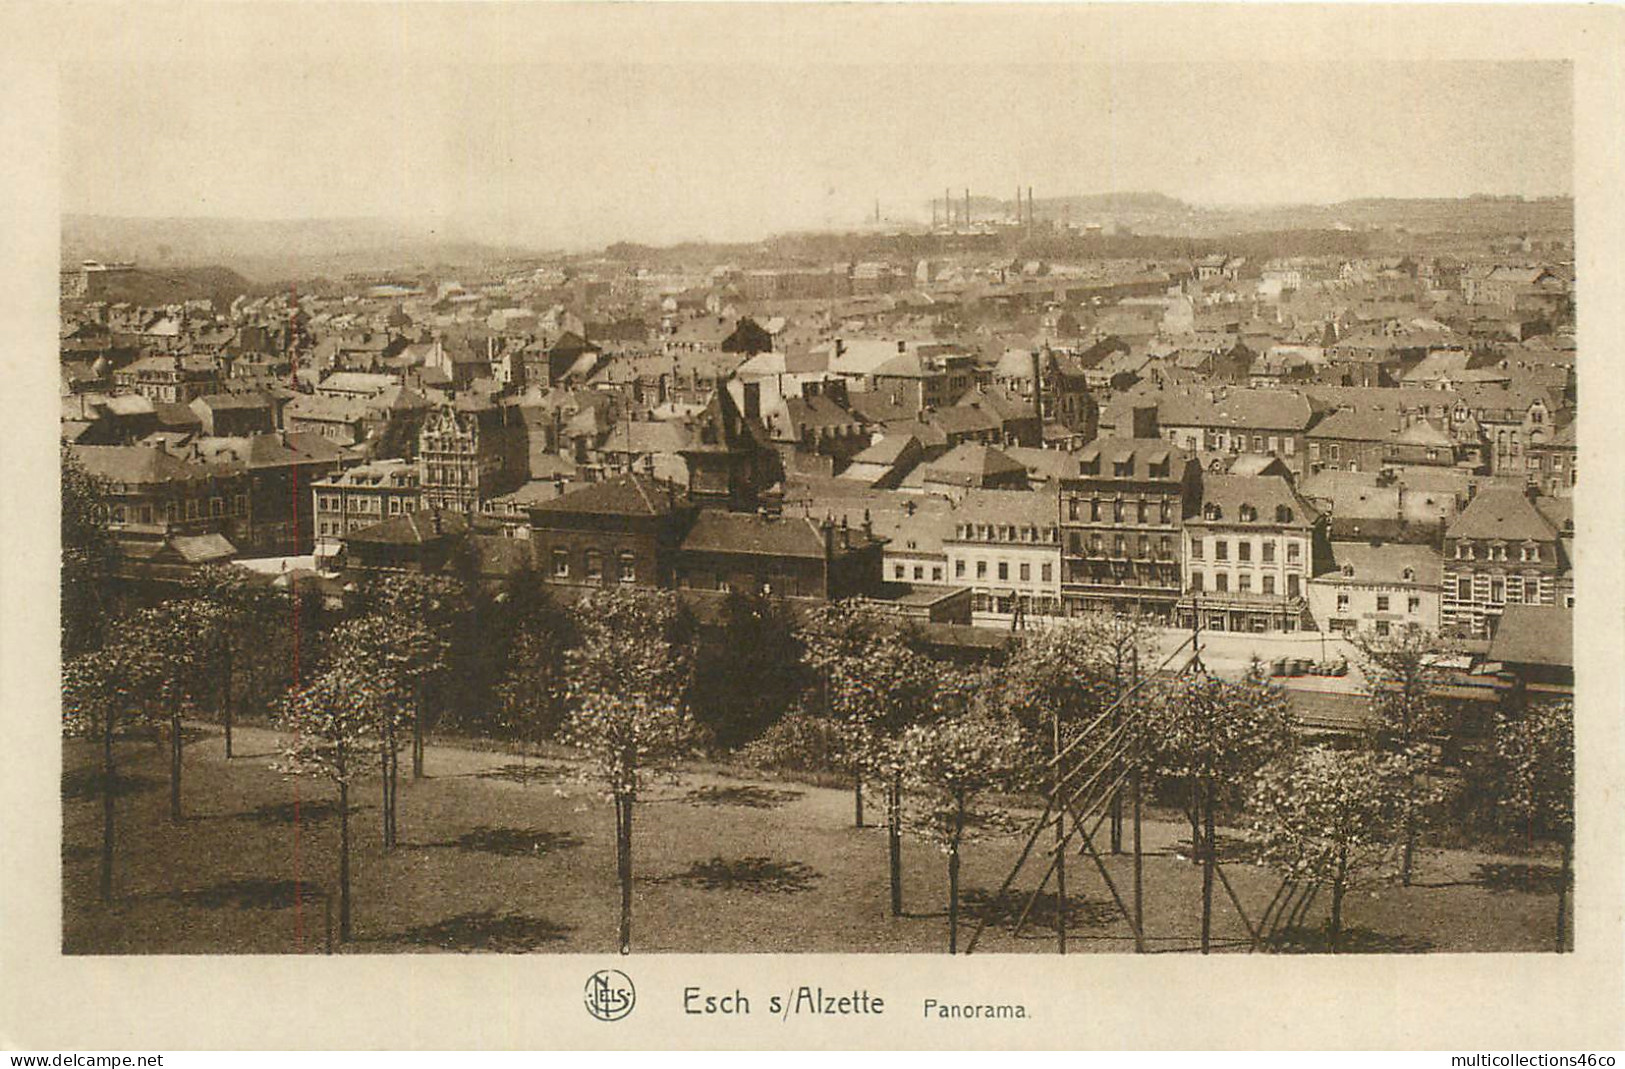 050523 - LUXEMBOURG - ESCH S/ ALZETTE Panorama - Luxembourg - Ville